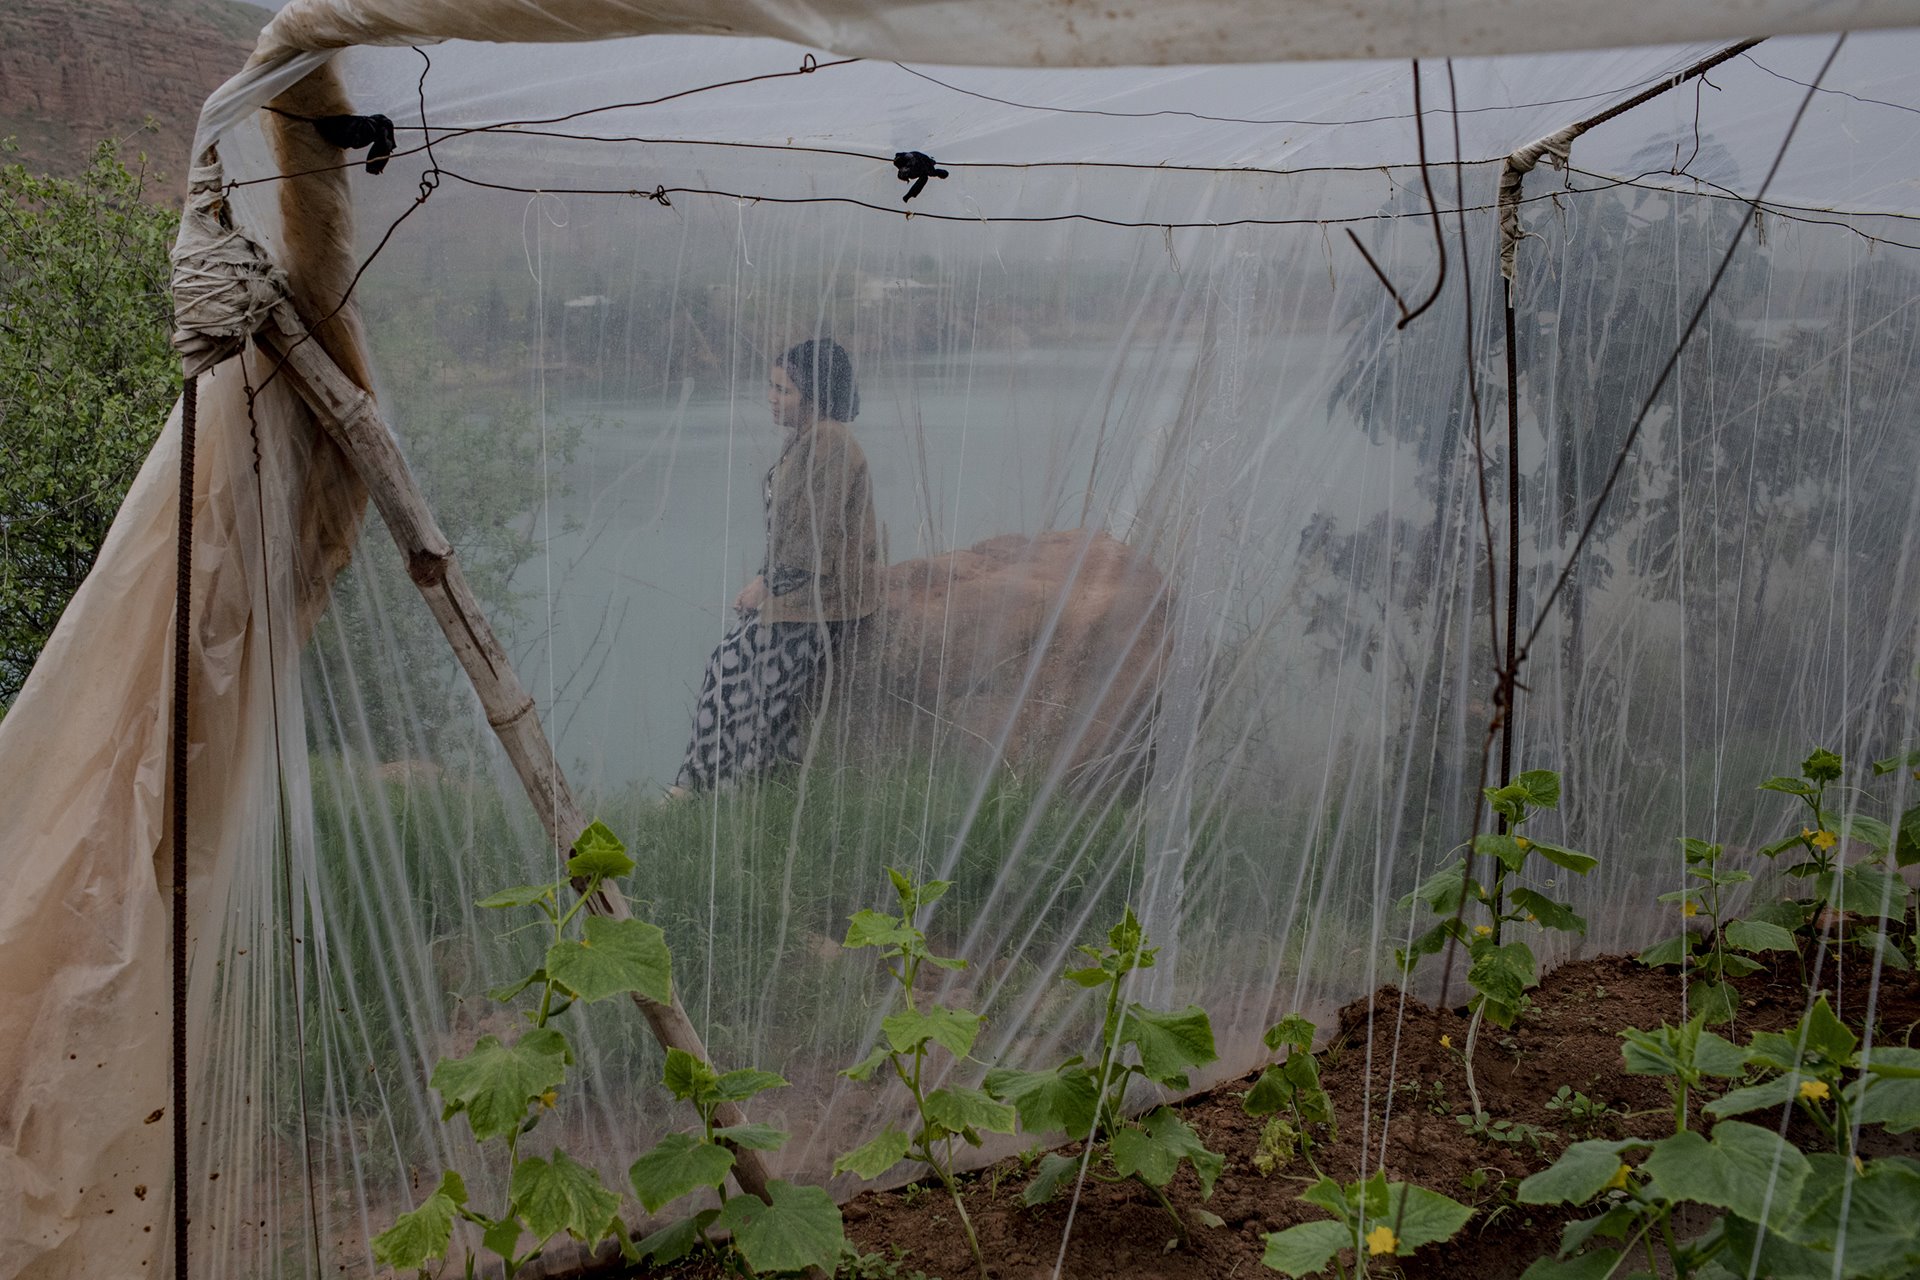 <p>An inhabitant of the village Istiqlol, Tajikistan, rests beside her greenhouse on the River Vakhsh, a tributary of the Amu Darya. She uses river water to irrigate her cucumbers.</p>
